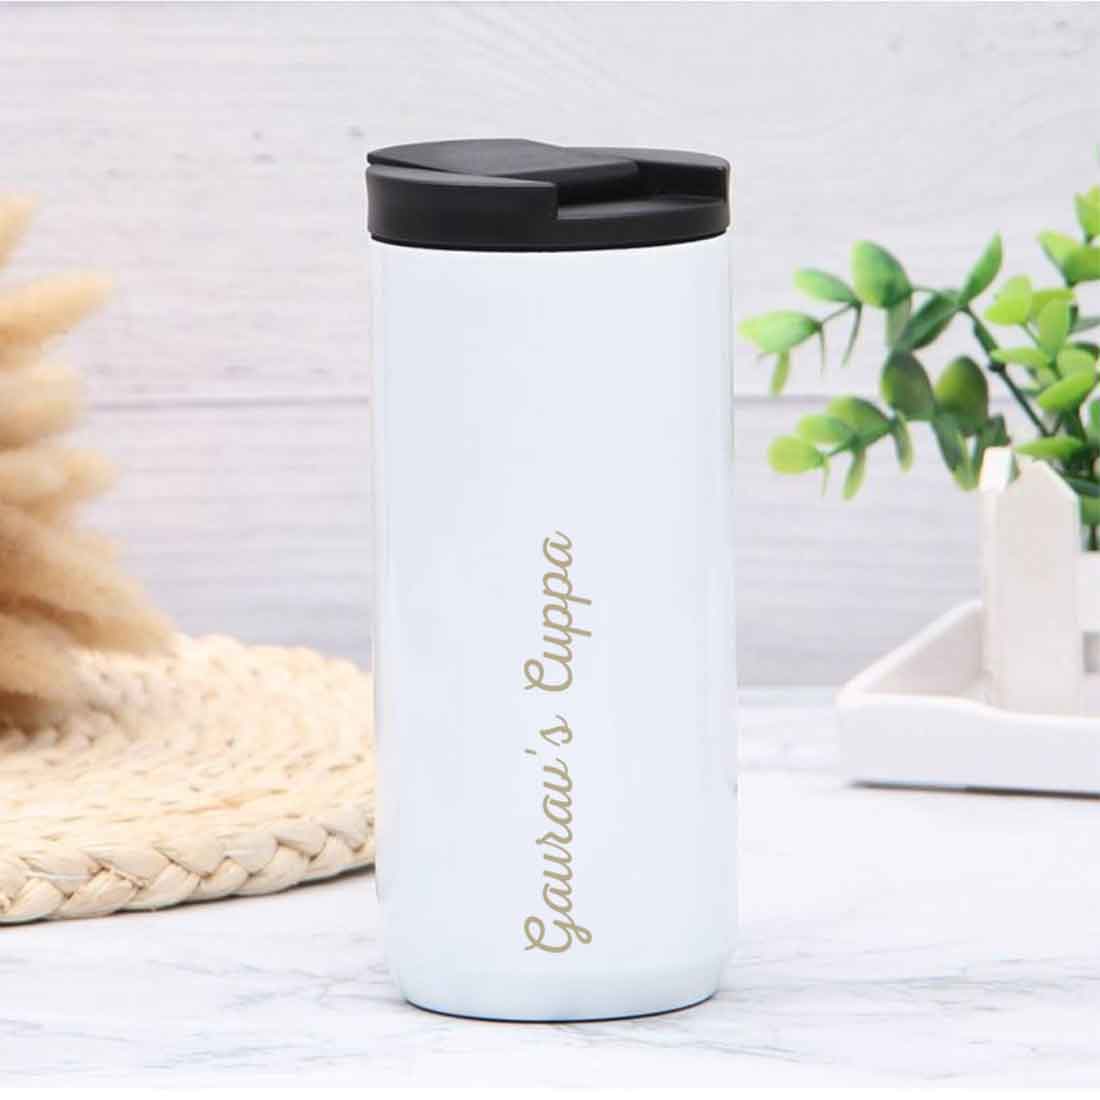 Engraved Personalized Stainless Steel Tumbler Coffee Mug with lid for Office Travel College